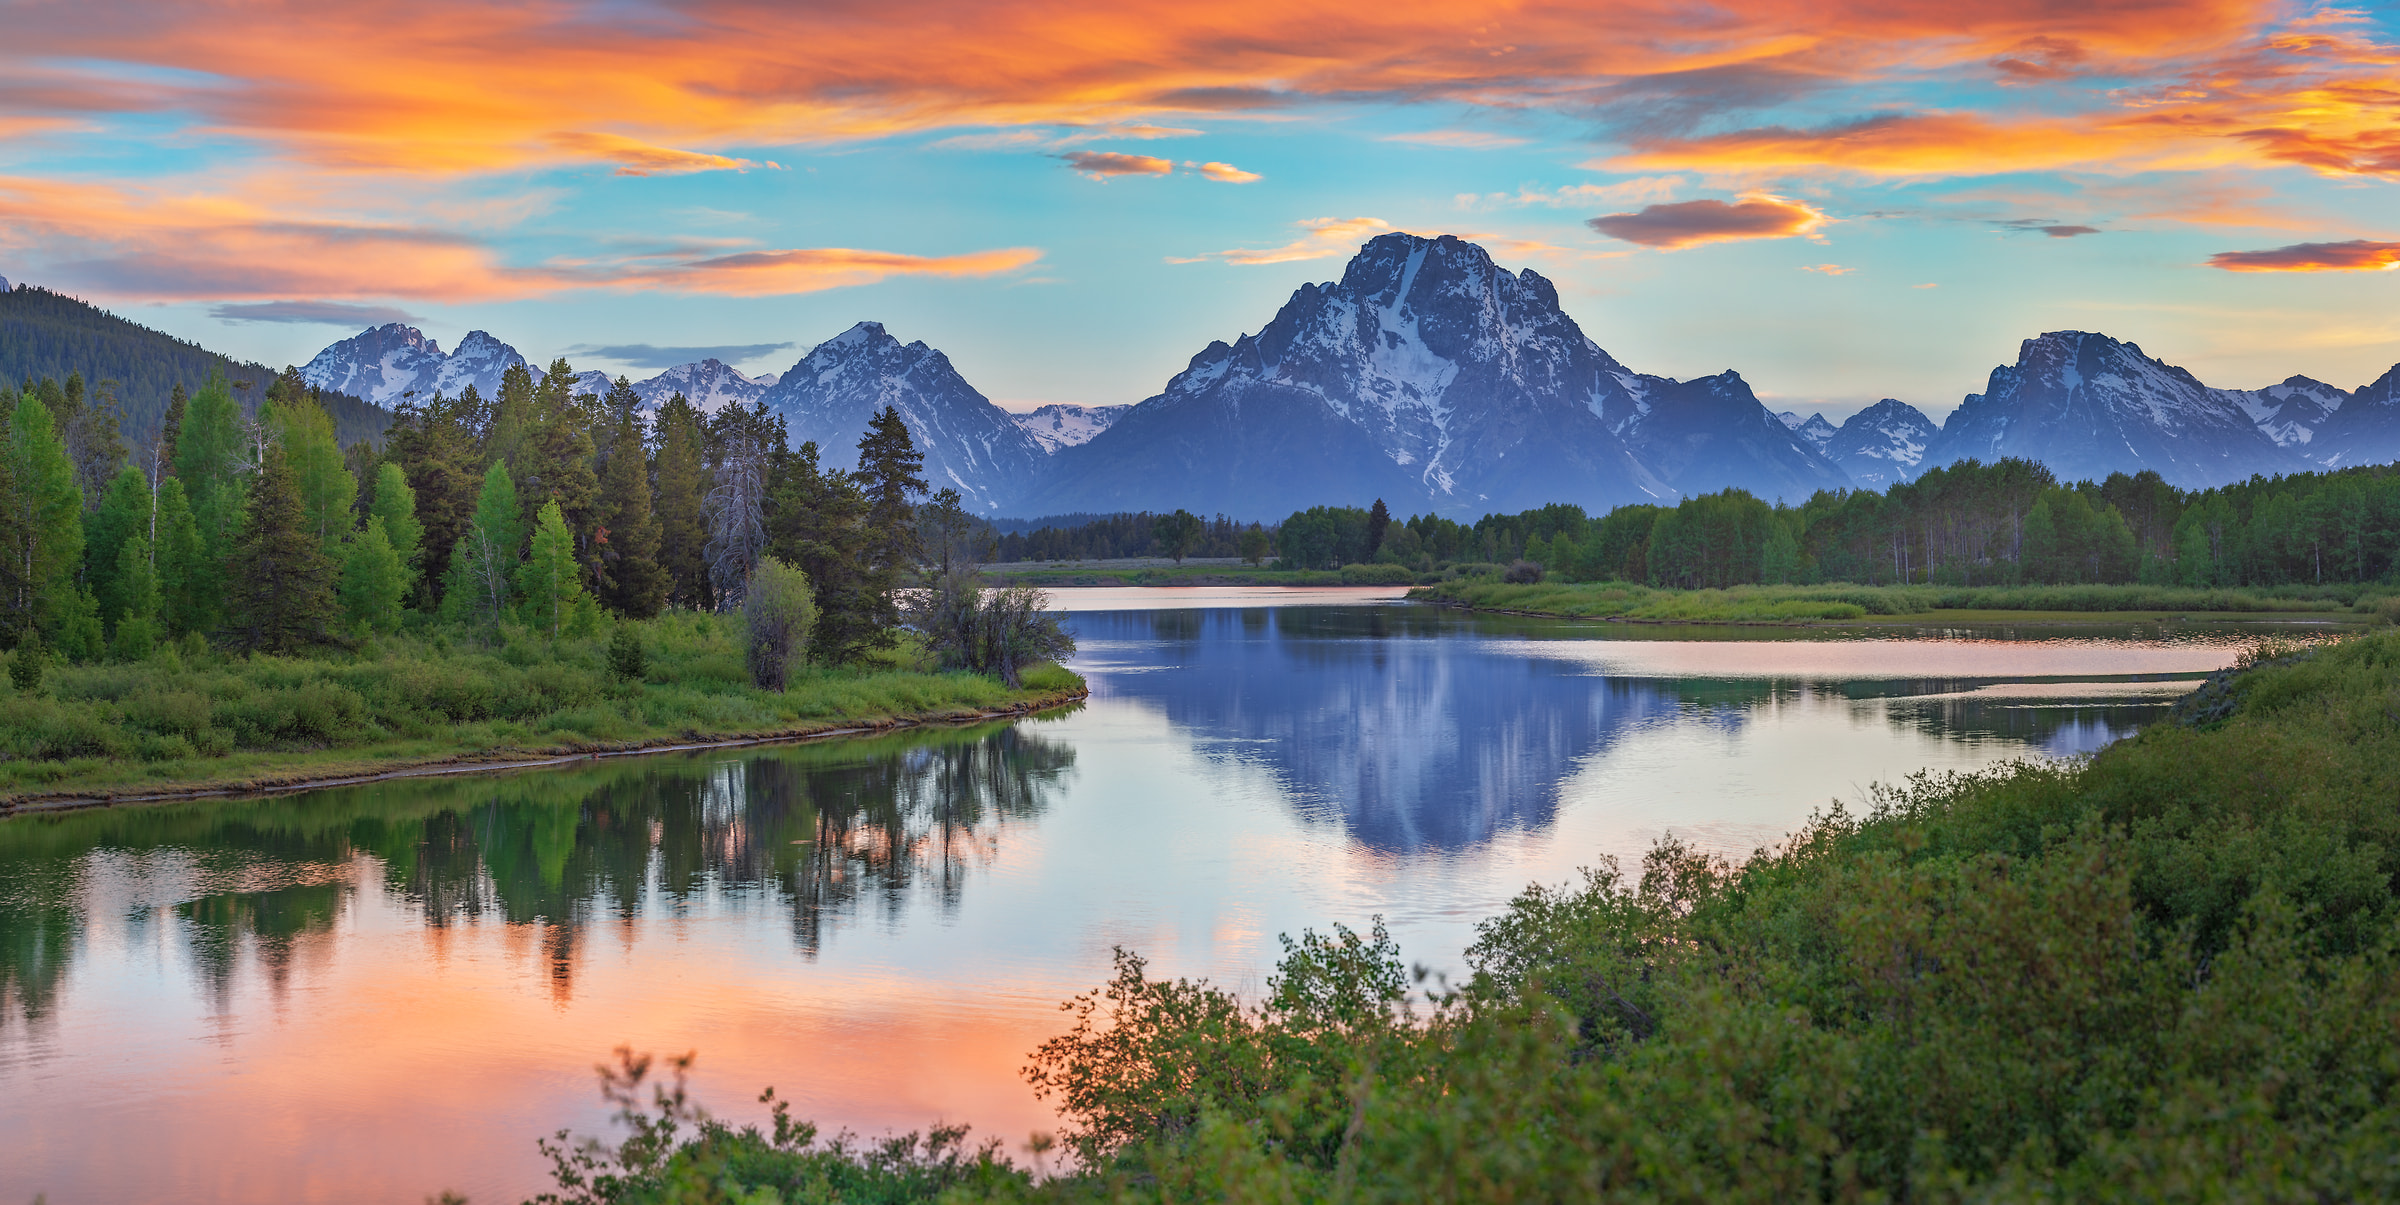 101 megapixels! A very high resolution, large-format VAST photo print of a sunset landscape with mountains, a river, and trees; photograph created by John Freeman in Oxbow Bend, Grand Tetons National Park, Wyoming